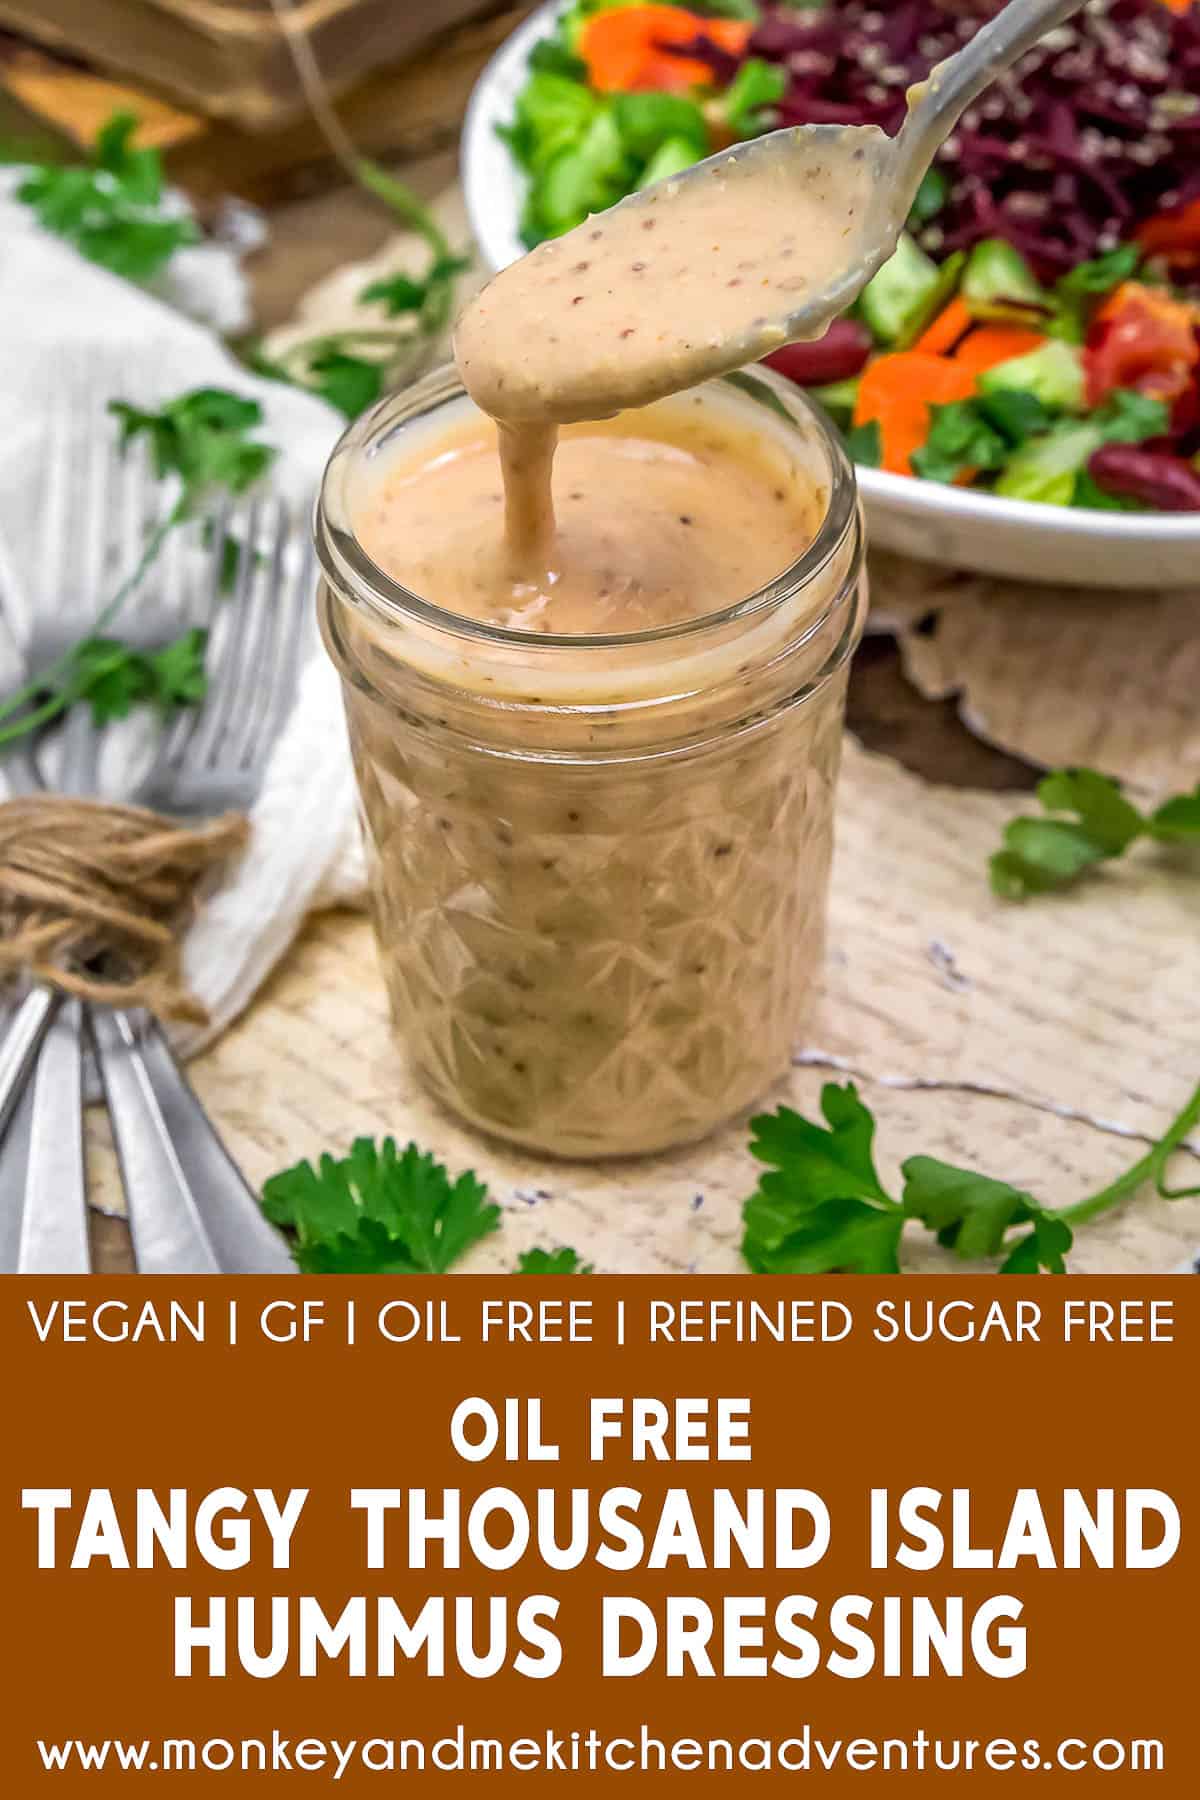 Oil Free Tangy Thousand Island Hummus Dressing with text description